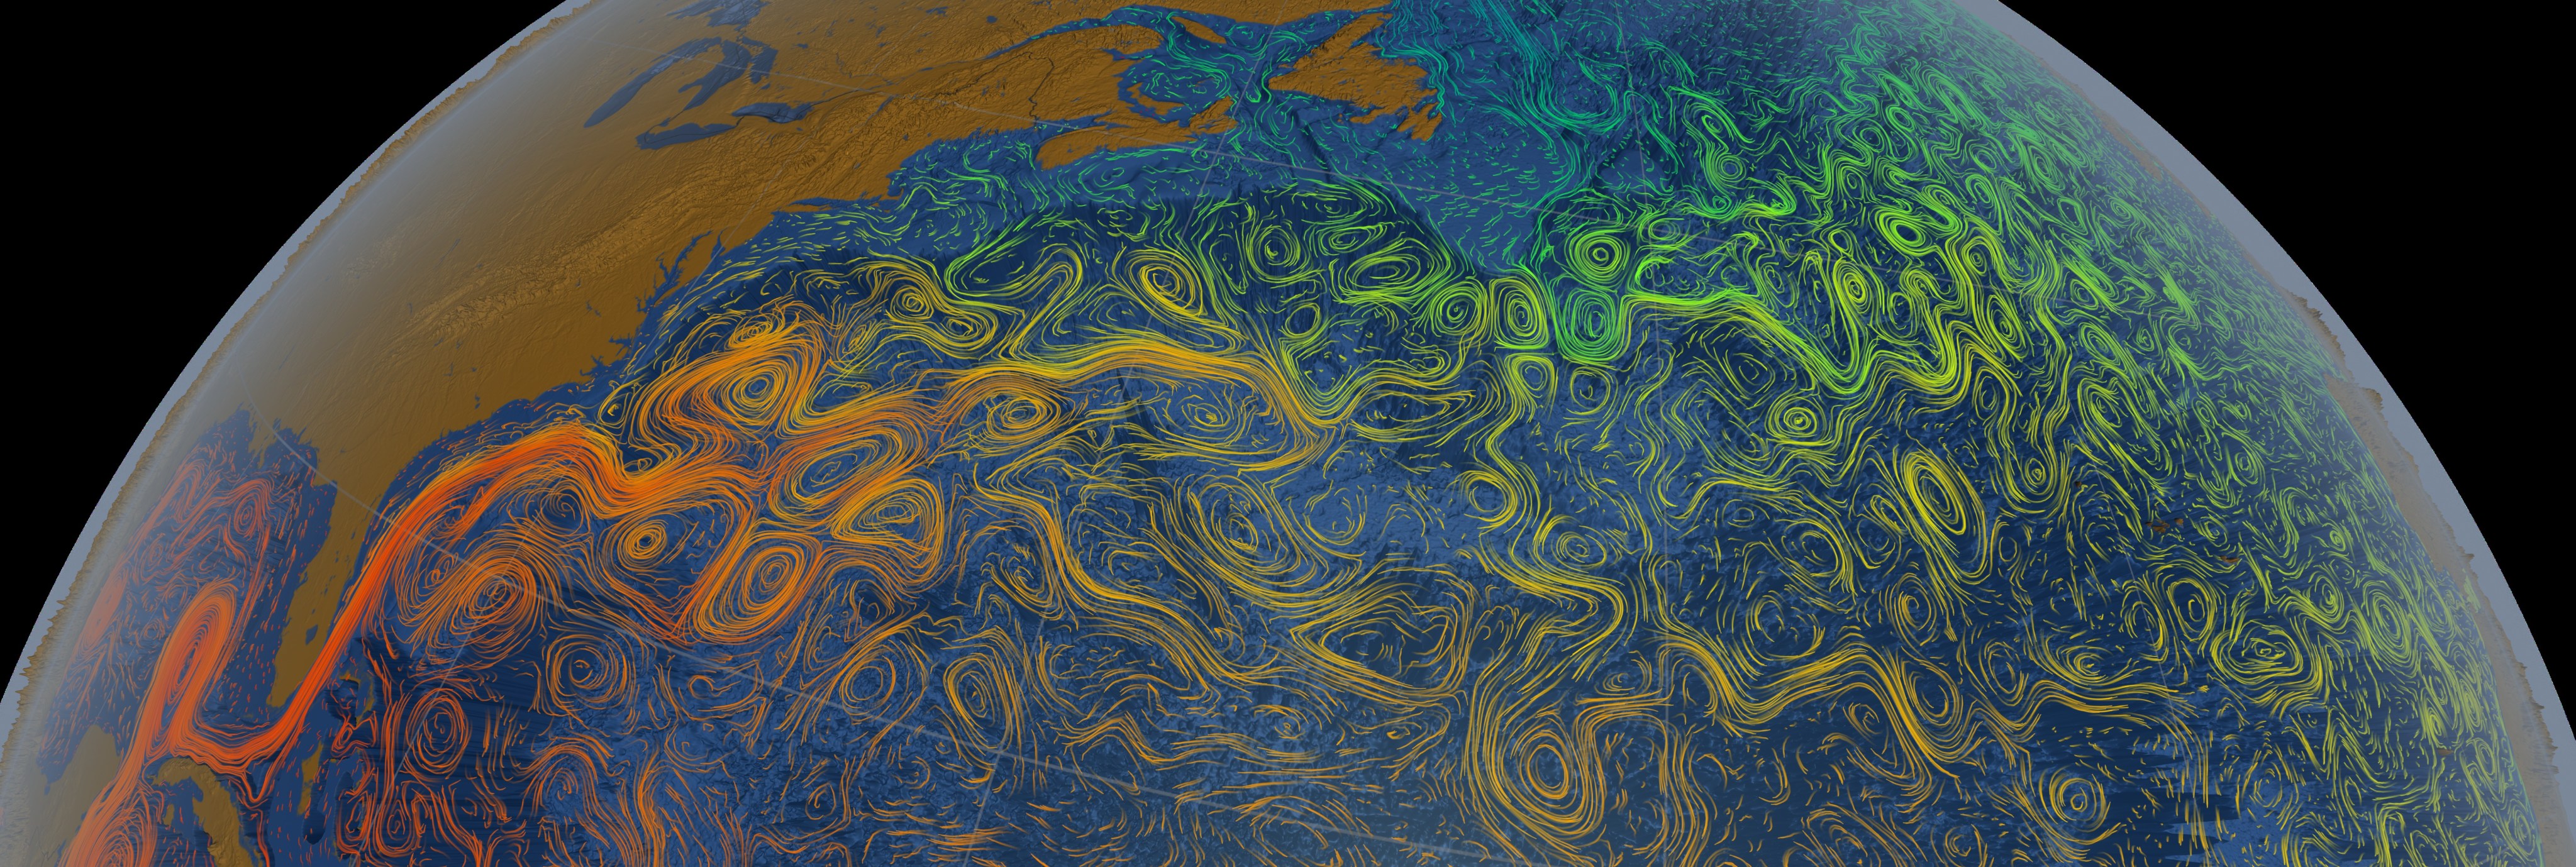 Visualization of the Gulf Stream stretching from the Gulf of Mexico to Western Europe